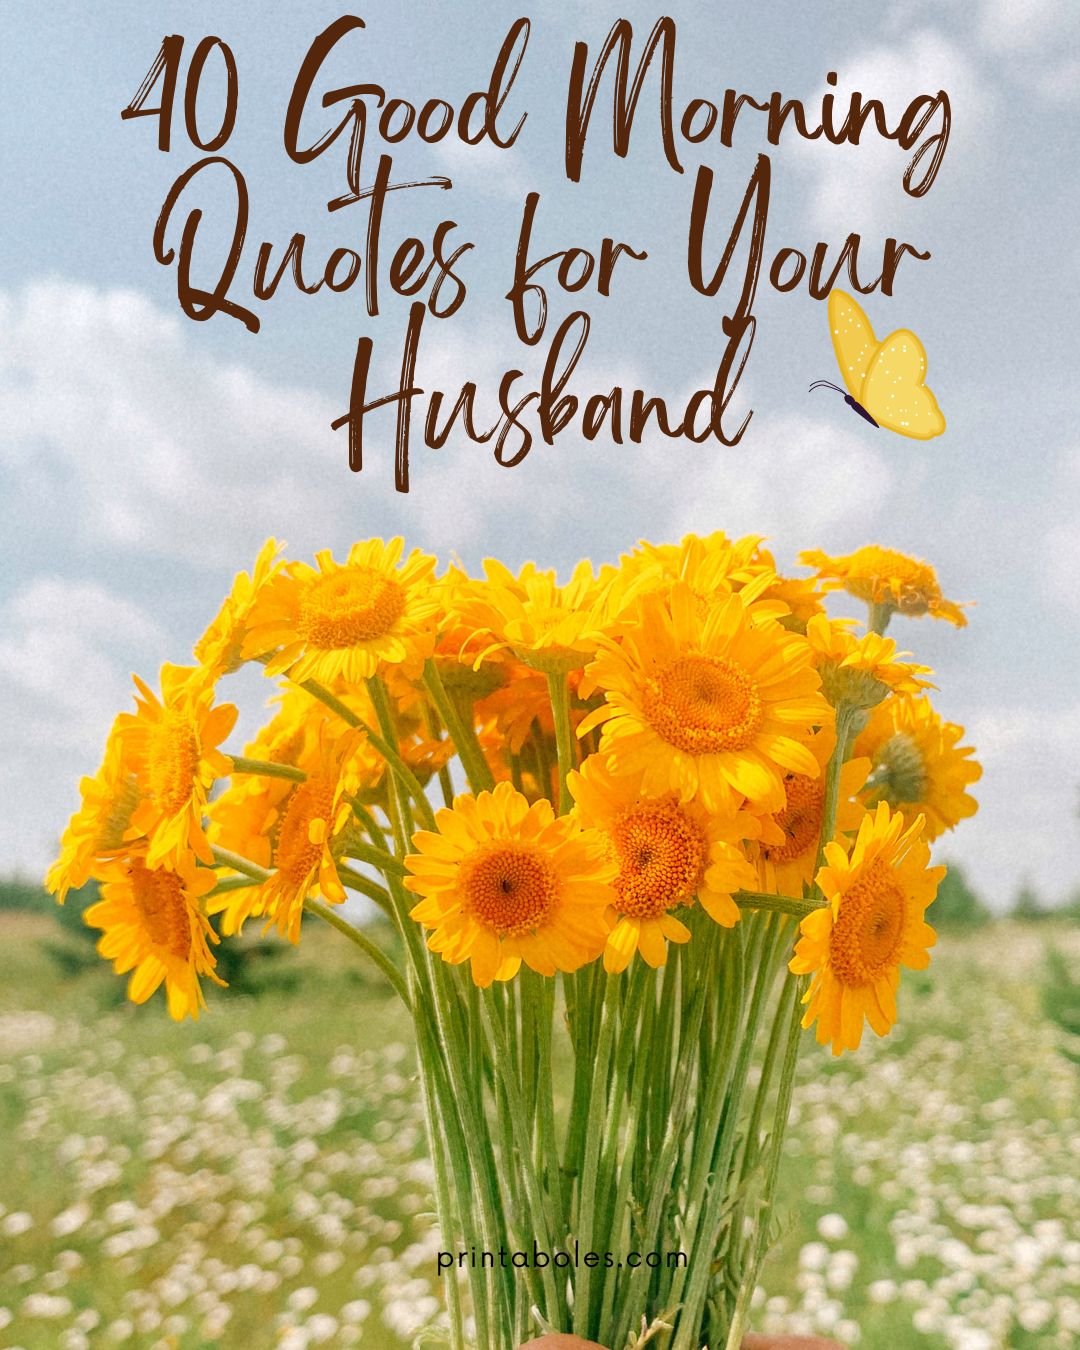 40 Good Morning Quotes for Your Husband